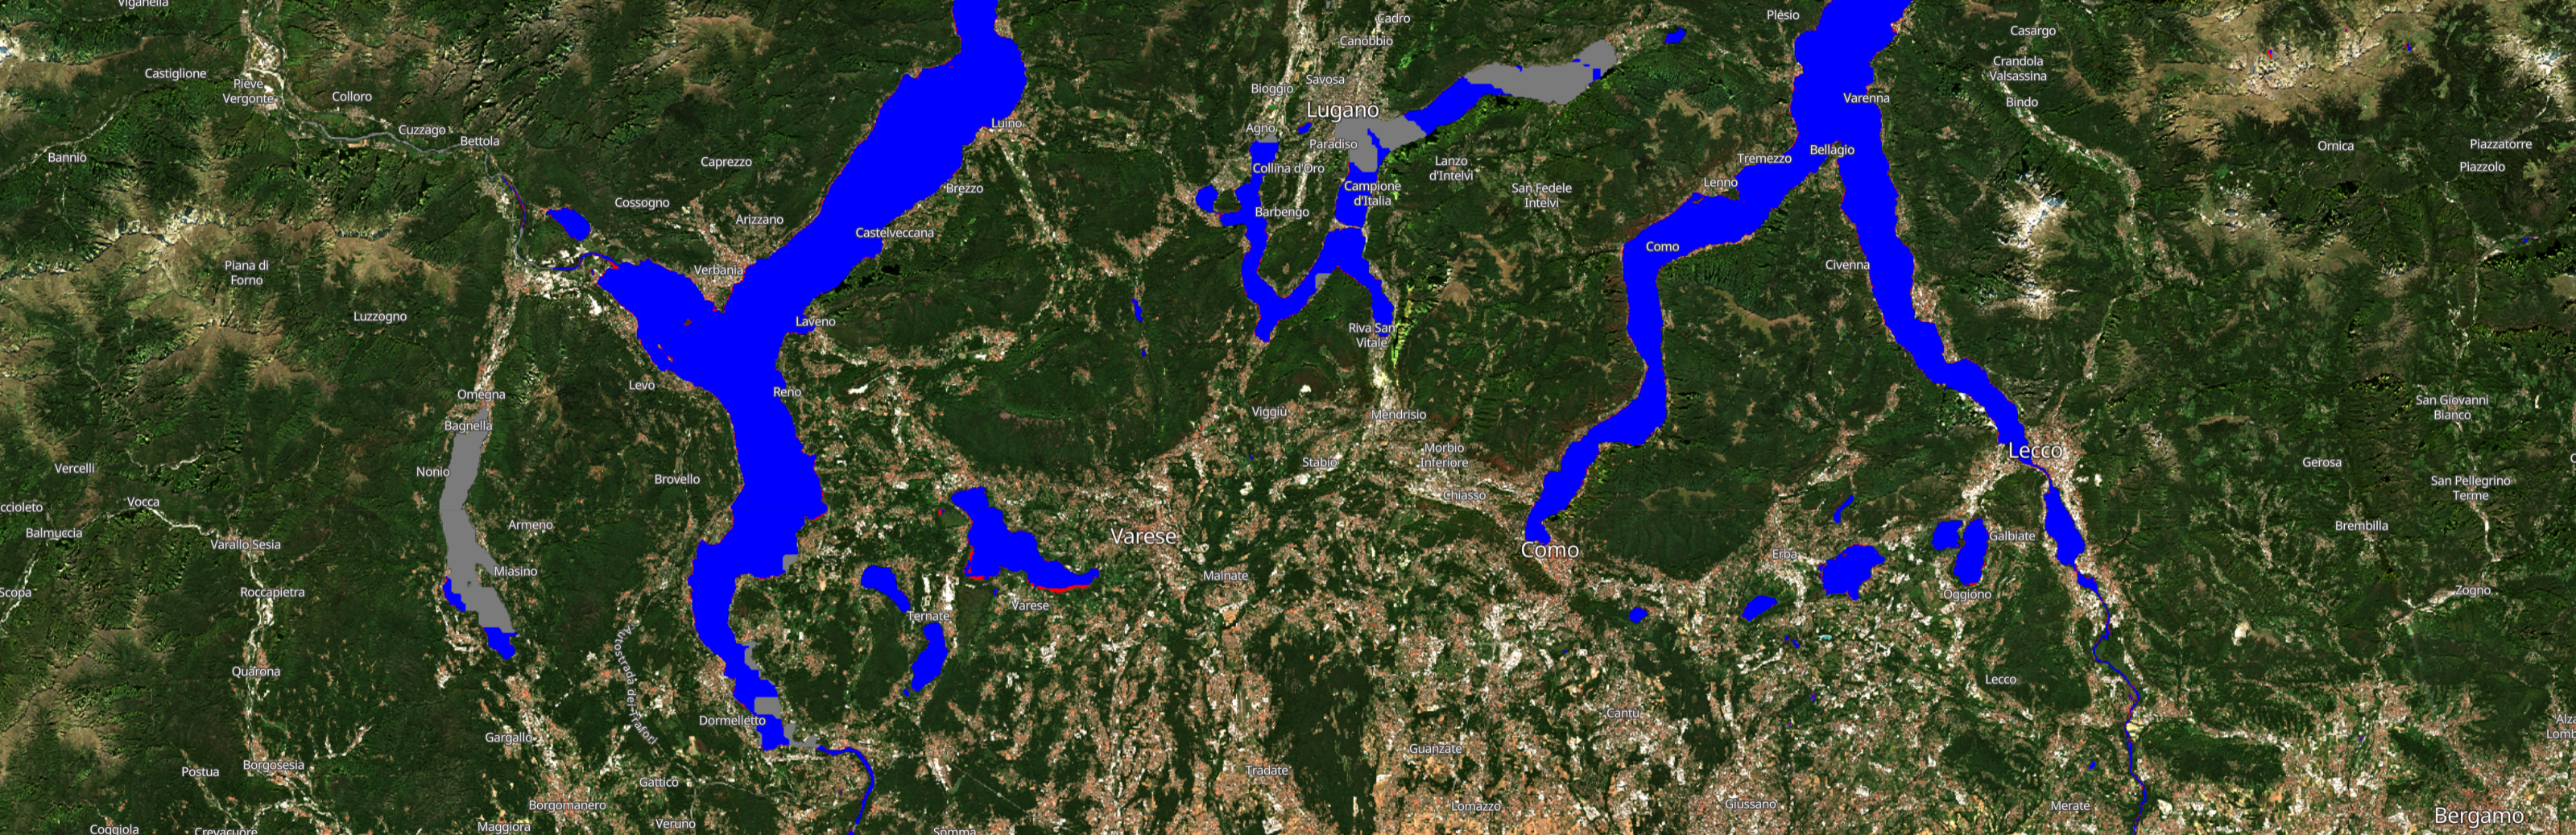 Sentinel 2 River and Lake Ice Extent